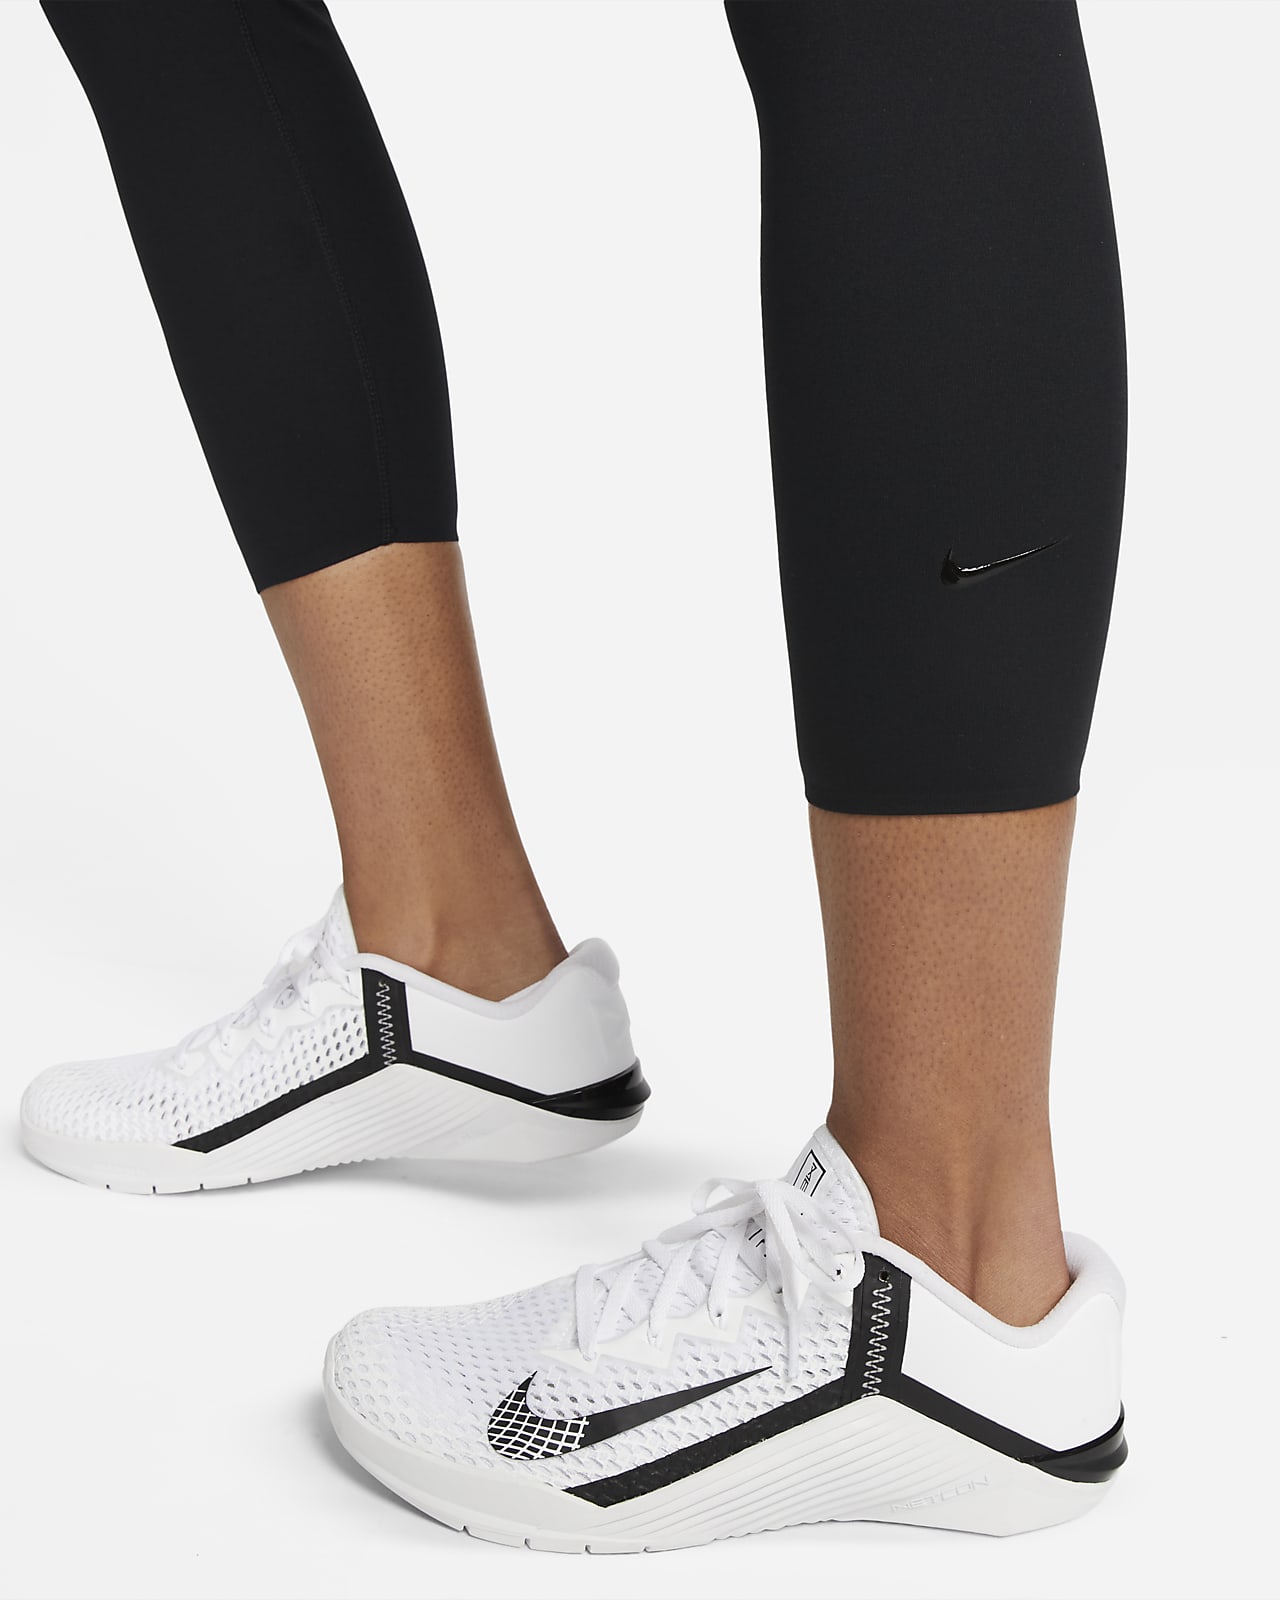 Women's, Nike One Luxe Cropped Tights